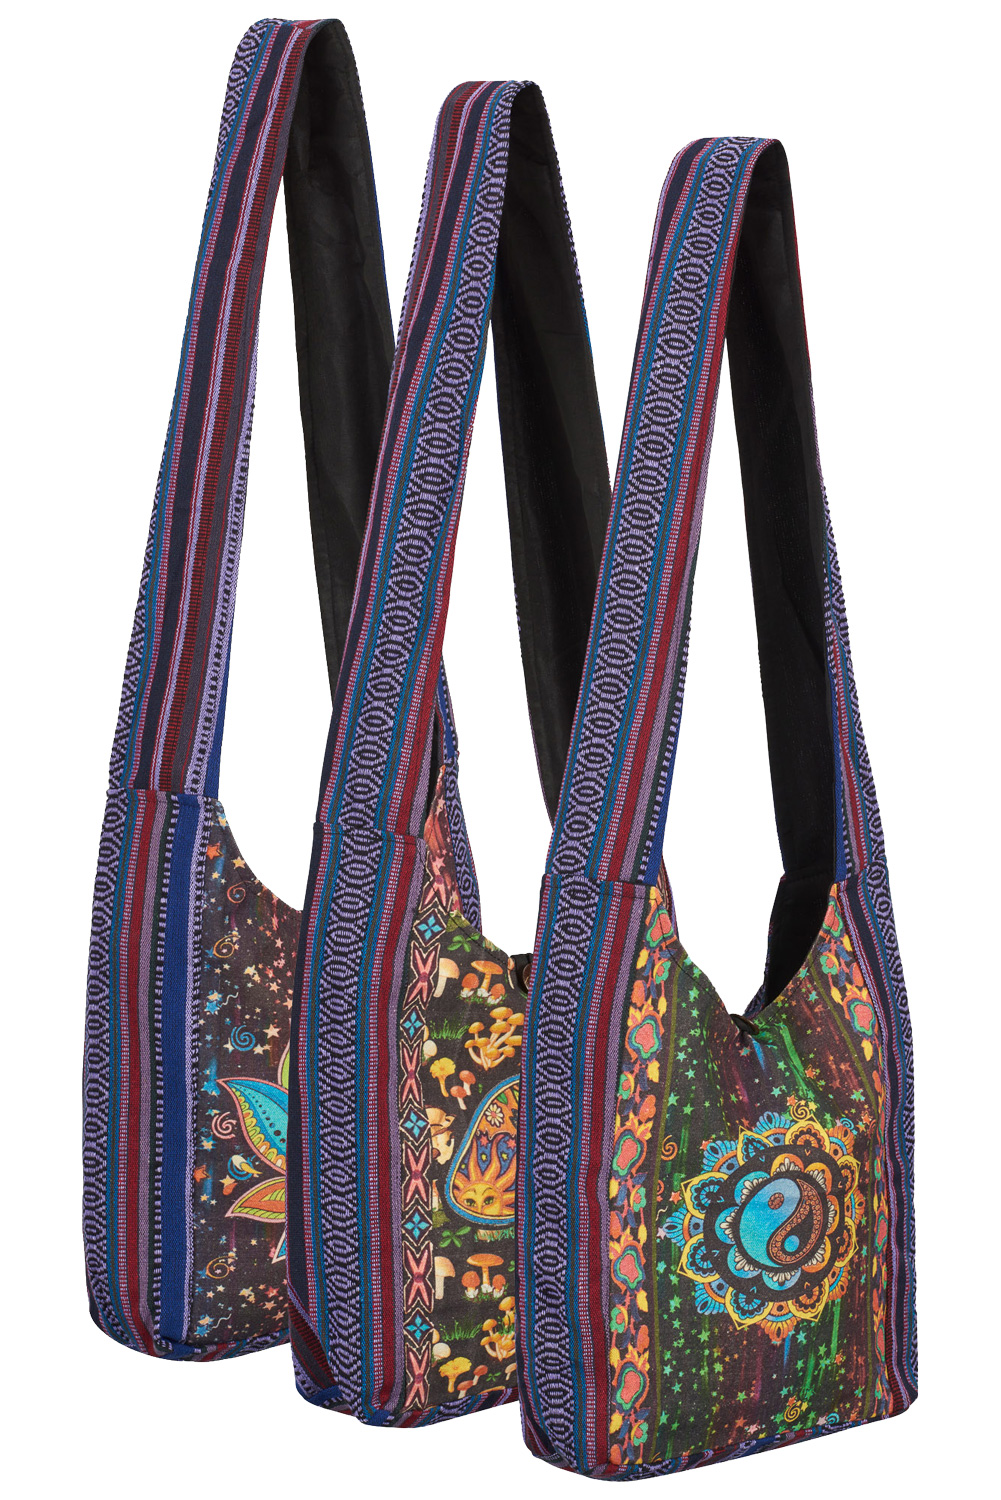 Wicked Dragon Clothing - Tree of Life embroidered shoulder bag